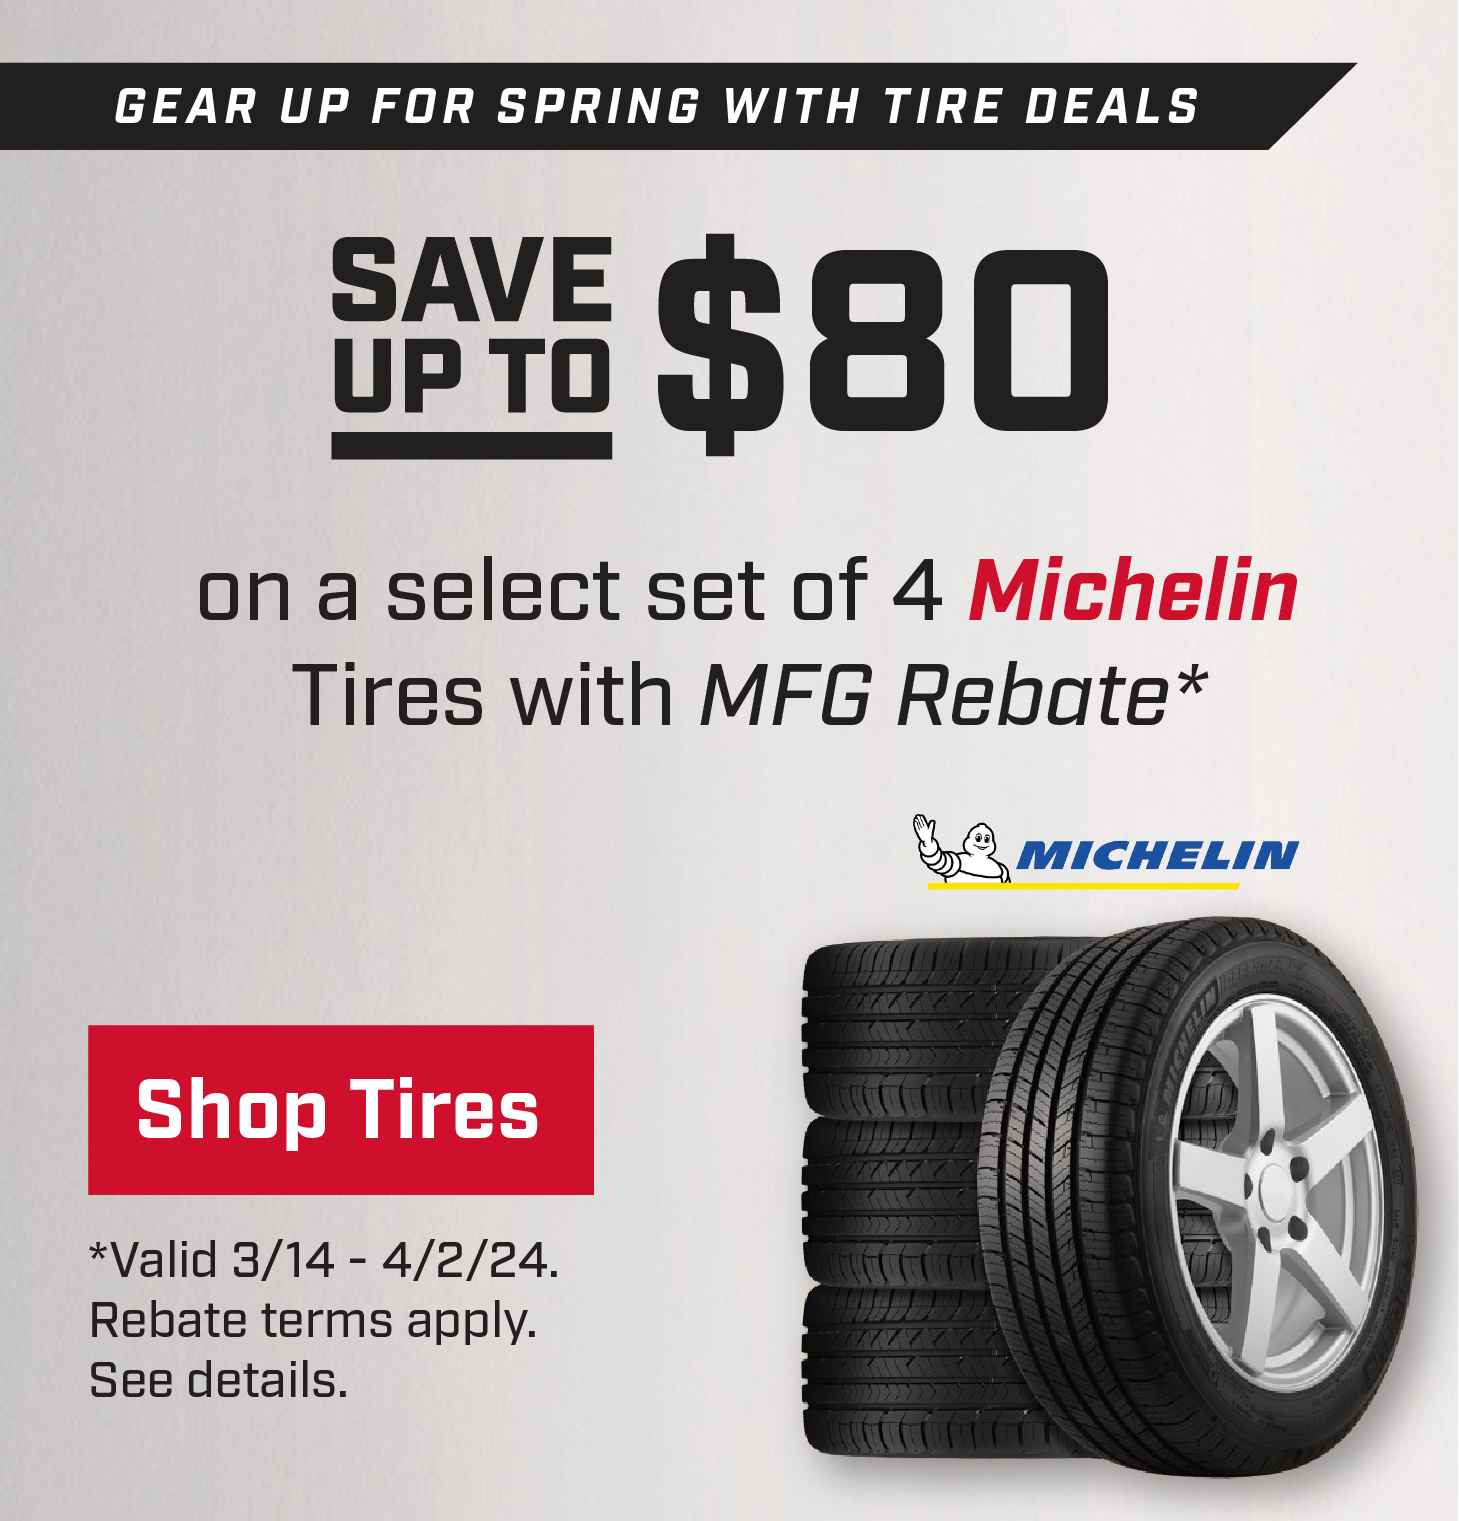 Tire Shop Near Me  New Tires for Cars, Trucks and SUVs